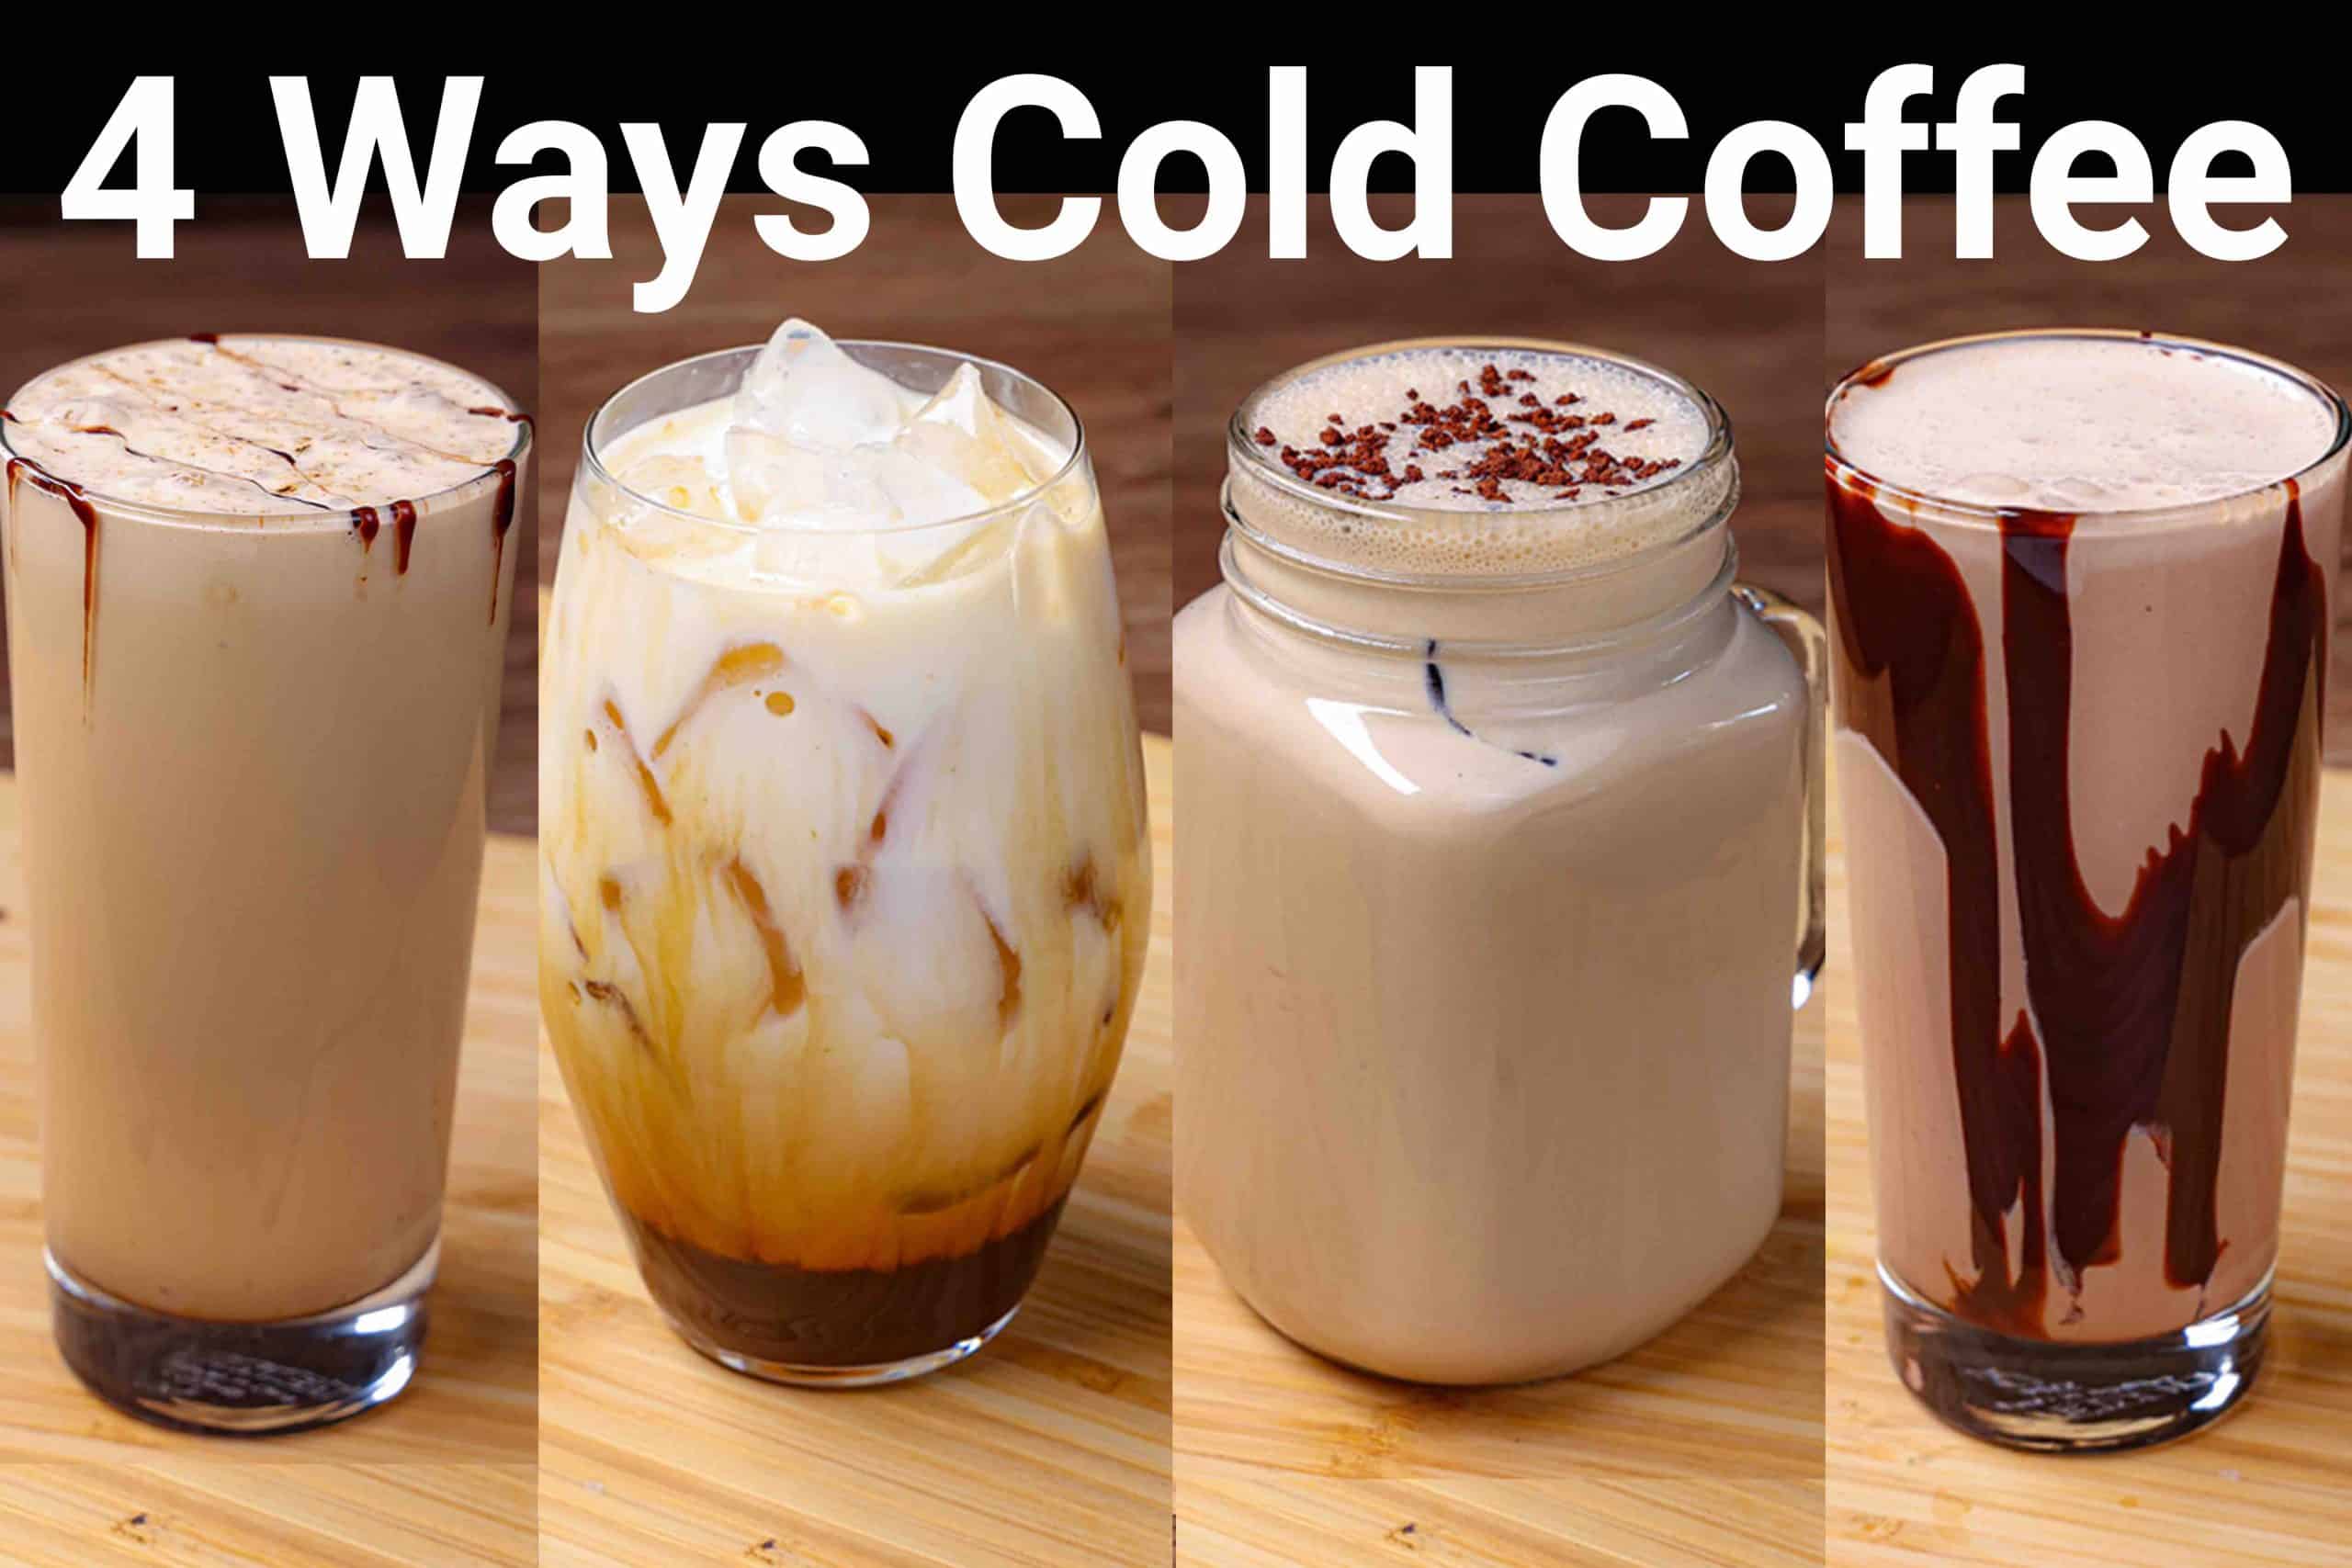 2 Ways Cold Coffee Recipe + Video (How to Make Cafe Style Cold Coffee)